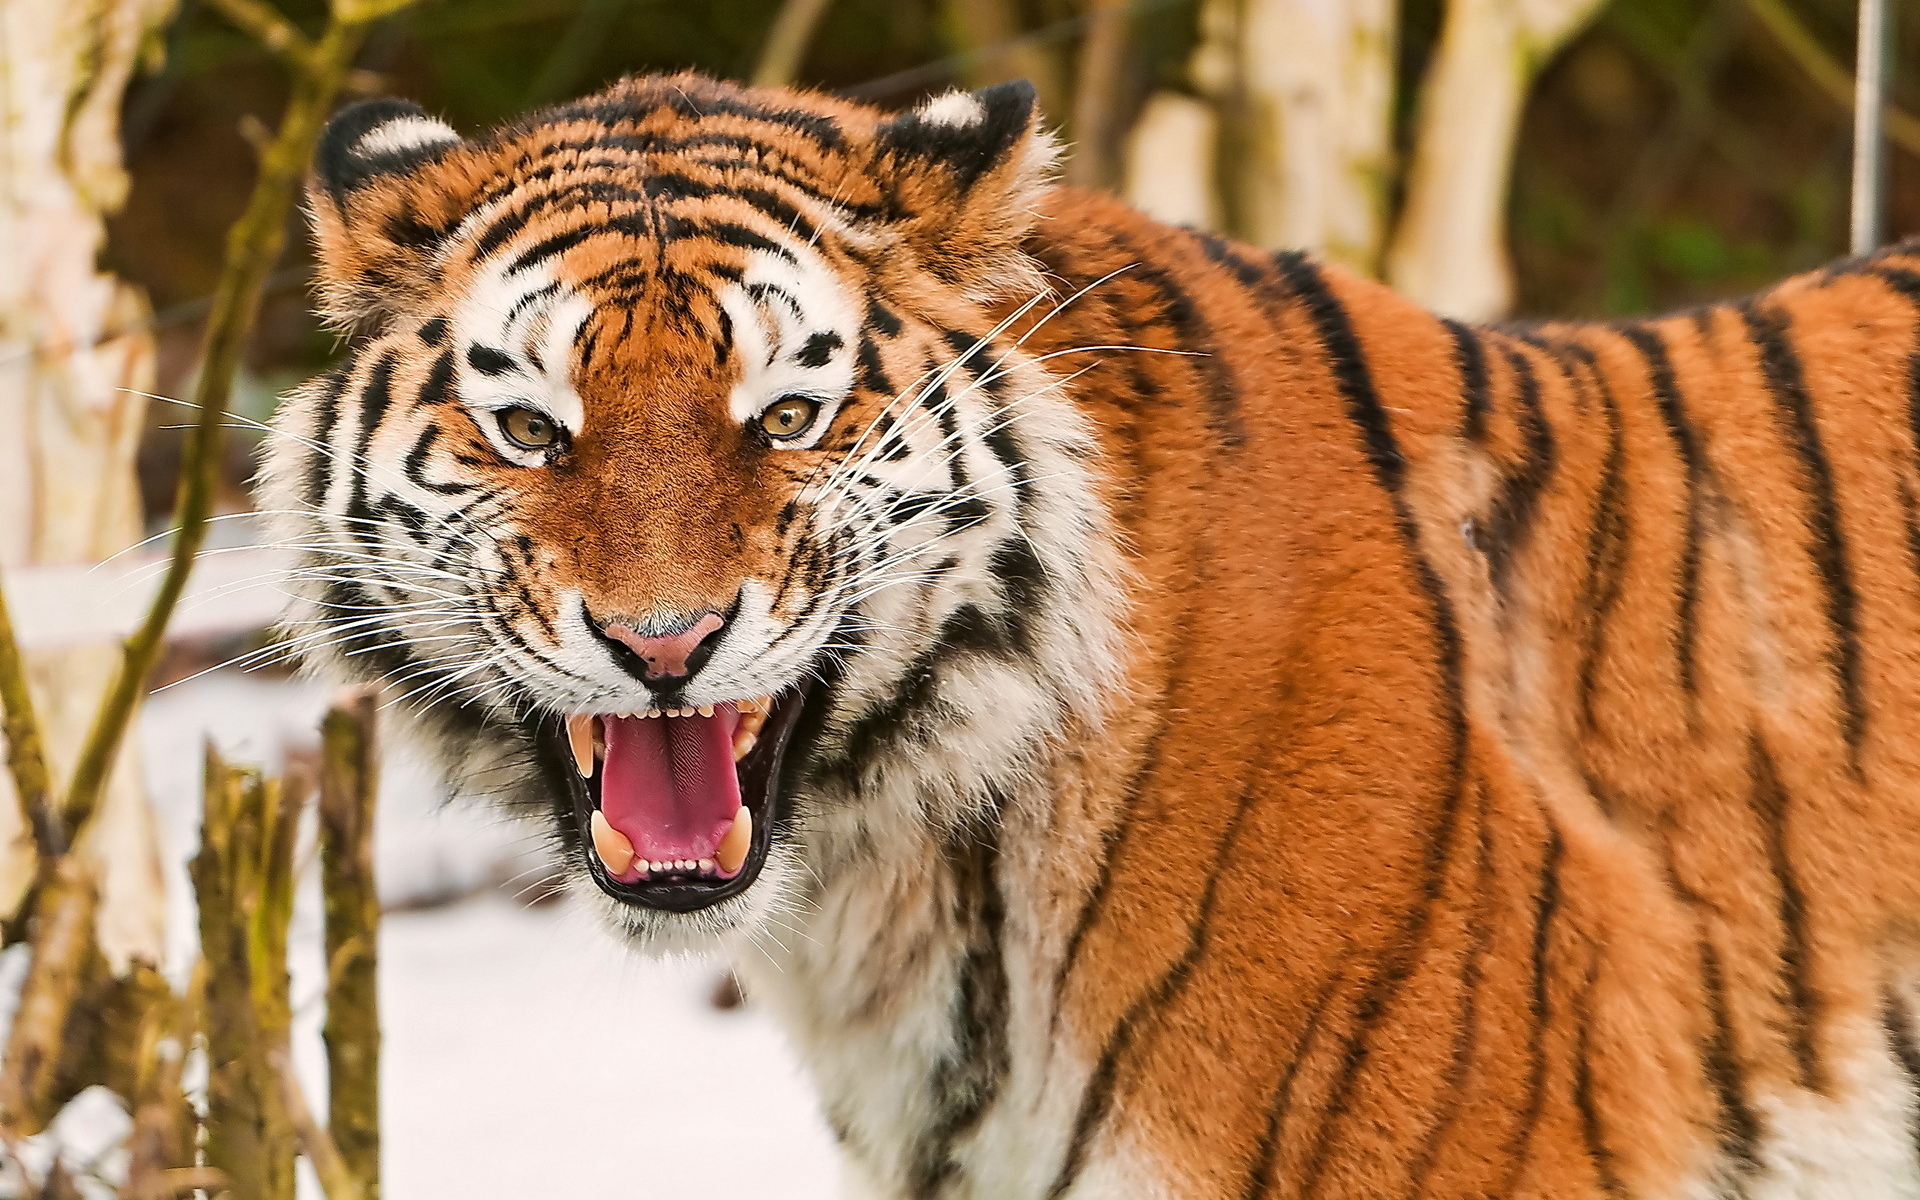 Tigers Face Roaring HD Wallpaper, Background Image